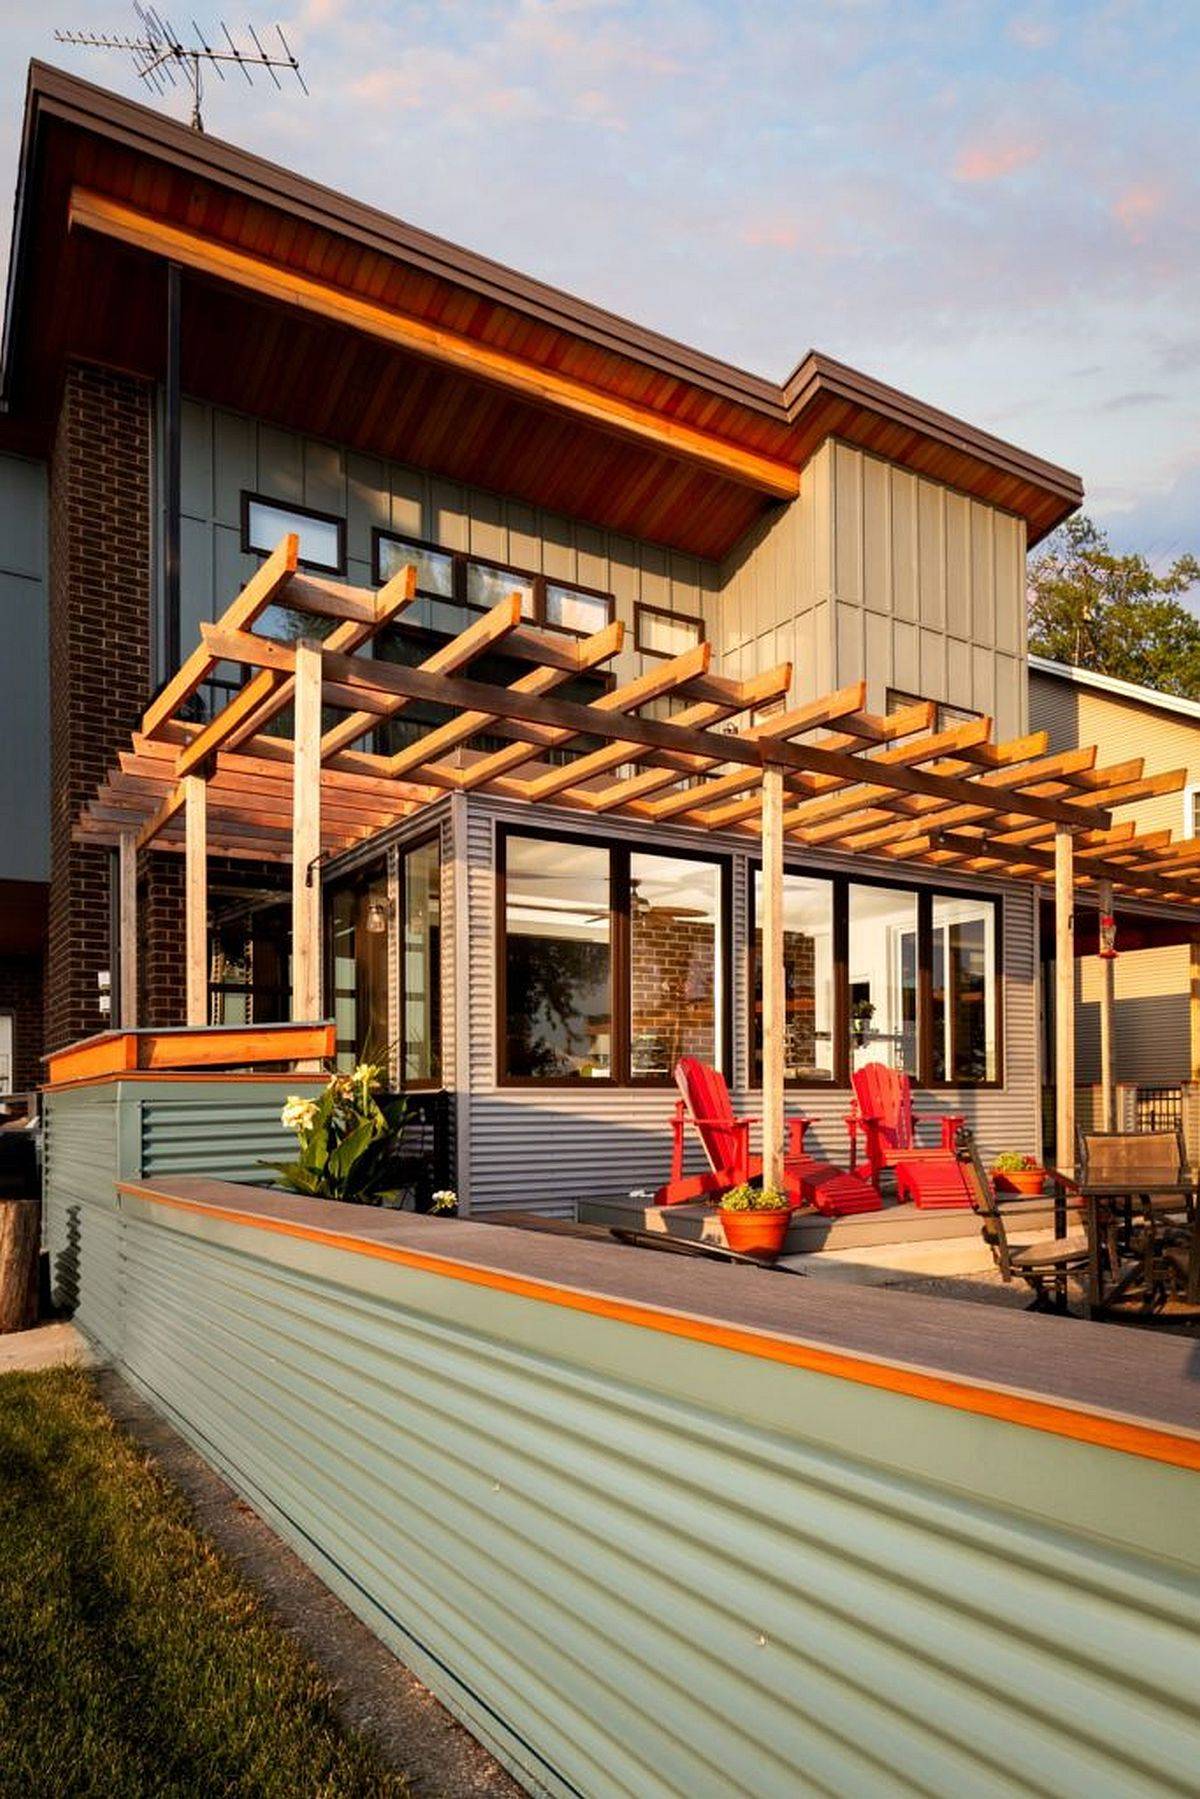 Custom-cedar-trellis-coupled-with-corrugated-metal-siding-shape-the-exterior-of-the-new-addition-81403